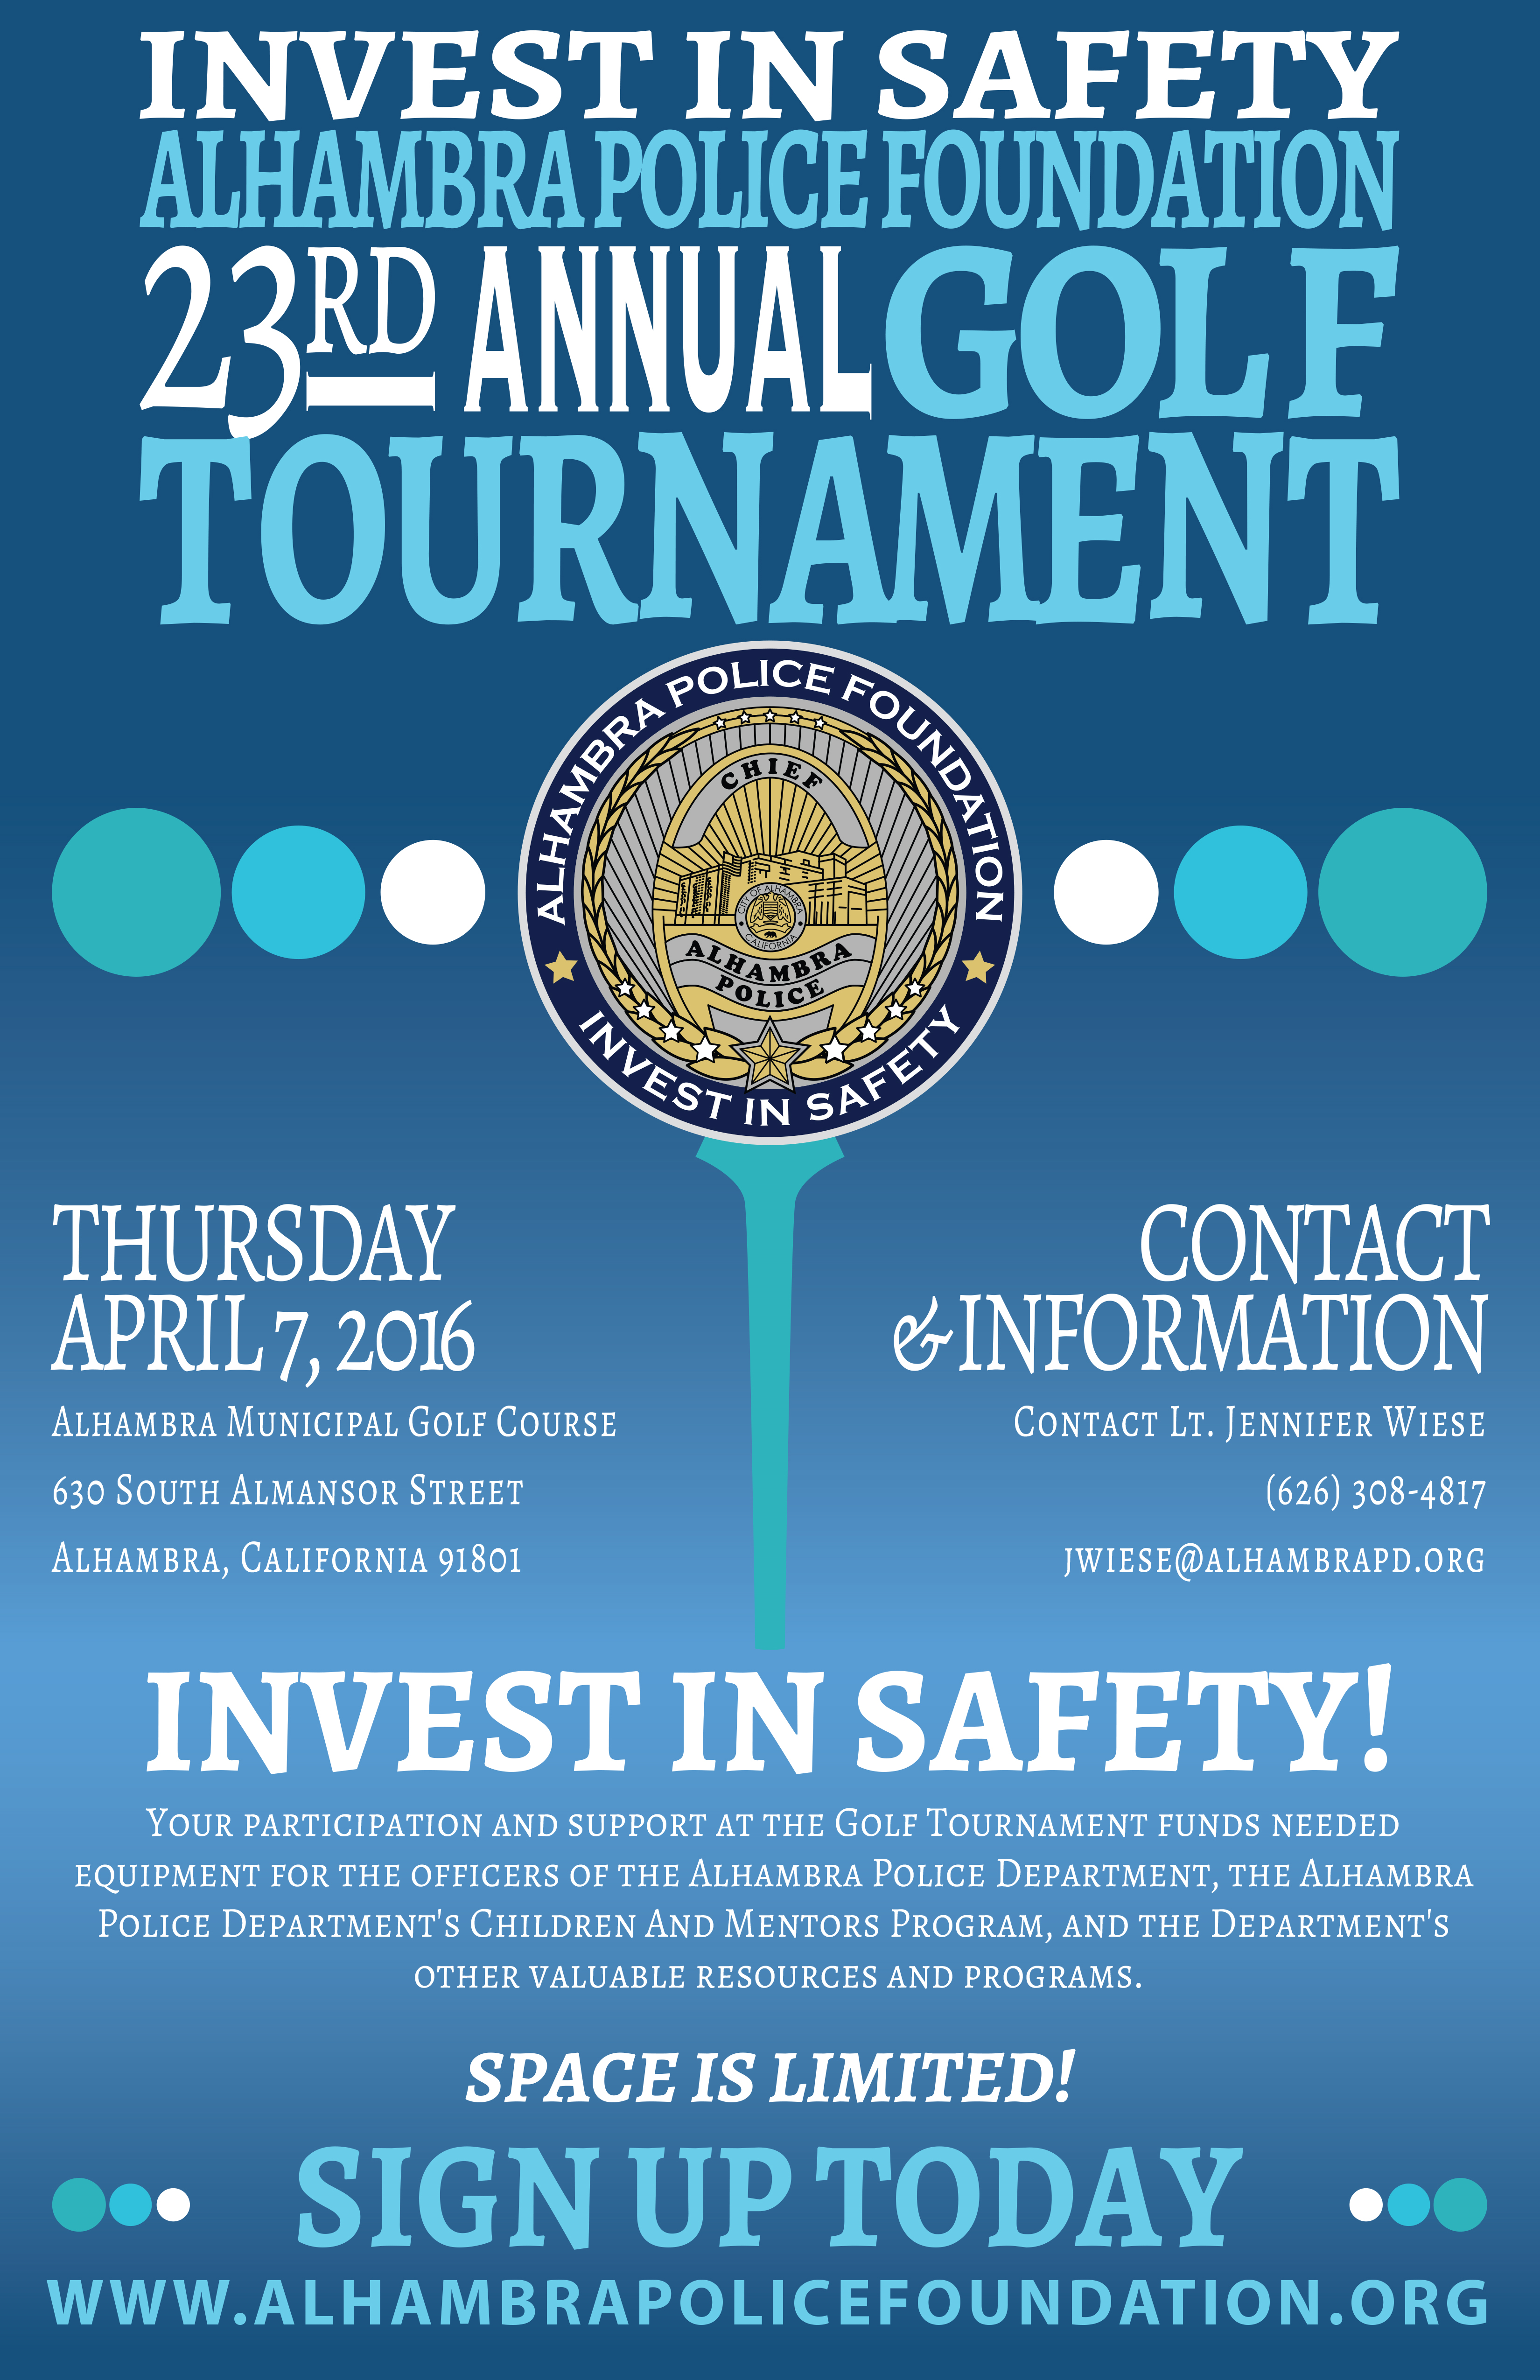 Sign up for our 23rd Annual Golf Tournament! Sign up at www.AlhambraPoliceFoundation.org